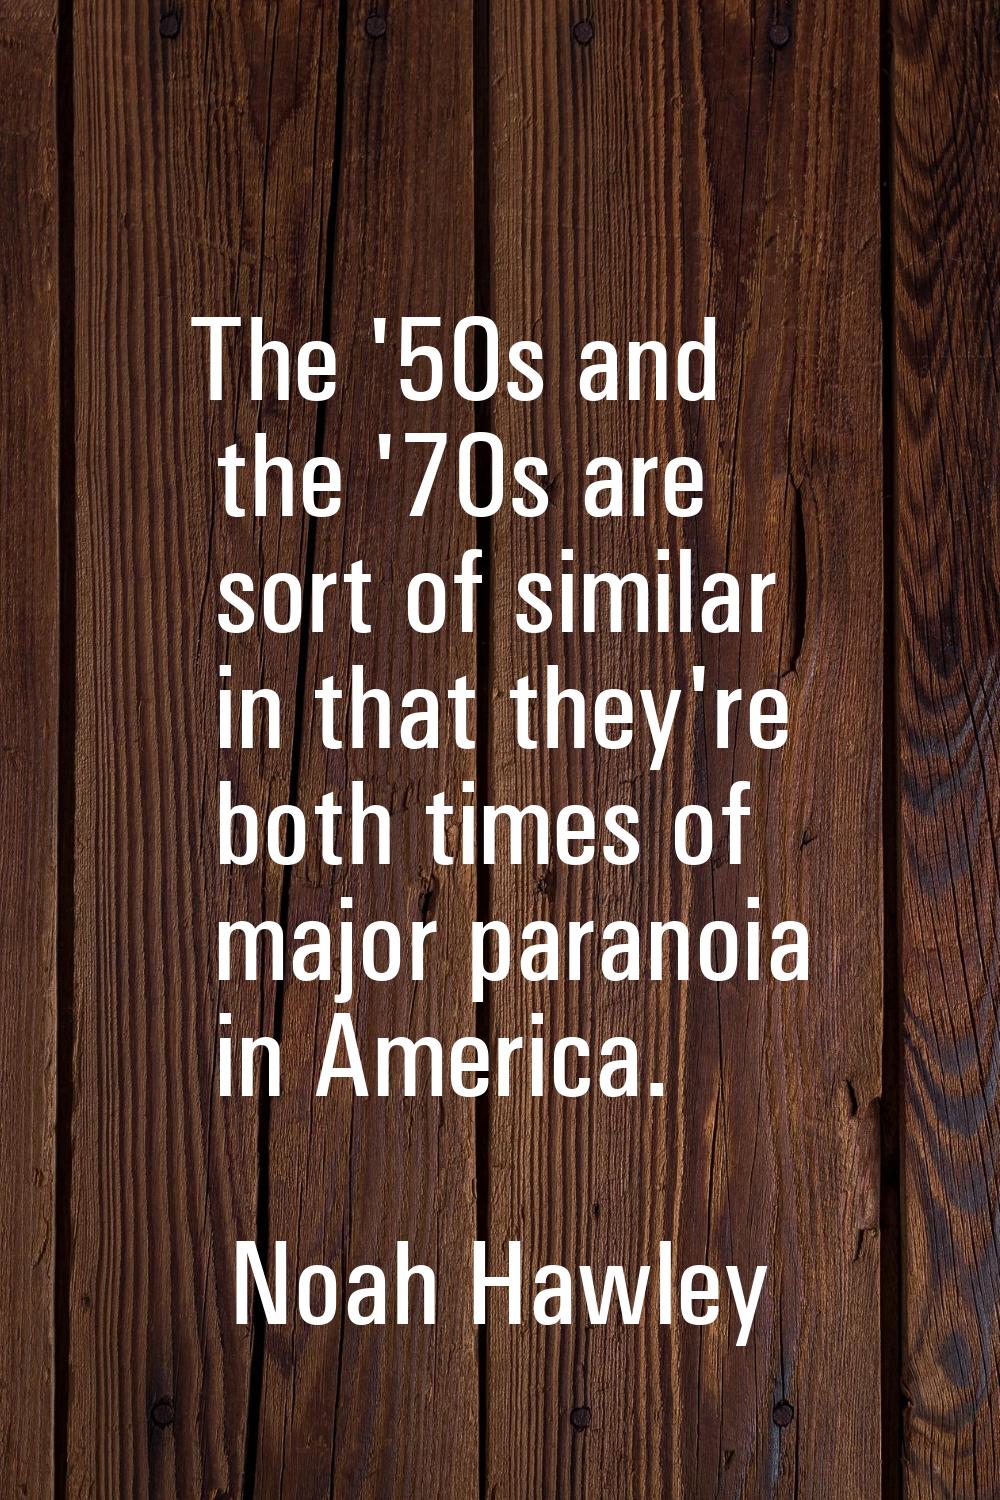 The '50s and the '70s are sort of similar in that they're both times of major paranoia in America.